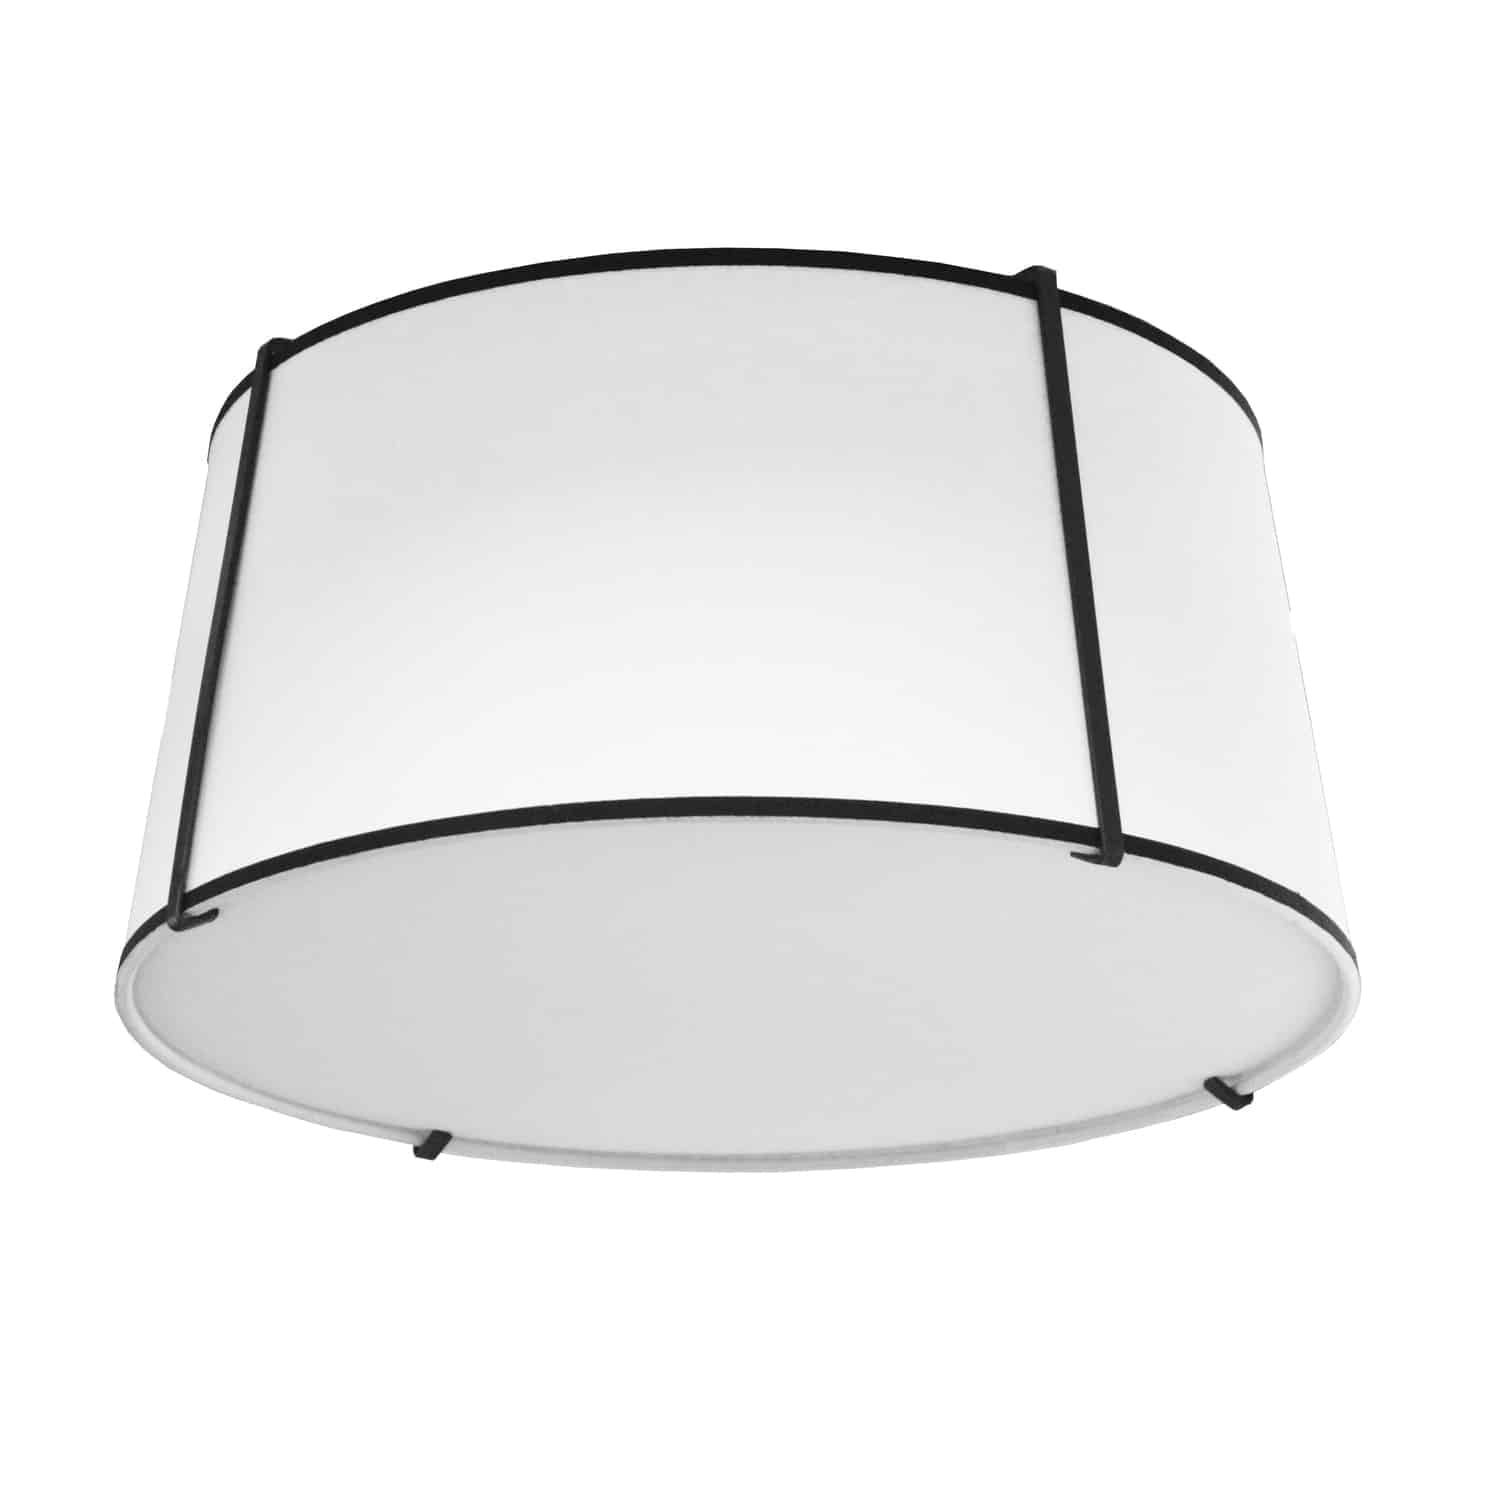 Picture of Dainolite TRA-3FH-BK-WH Trapazoid 3 Light Flush Mount Ceiling Light with 790 Diffuser - Black & White